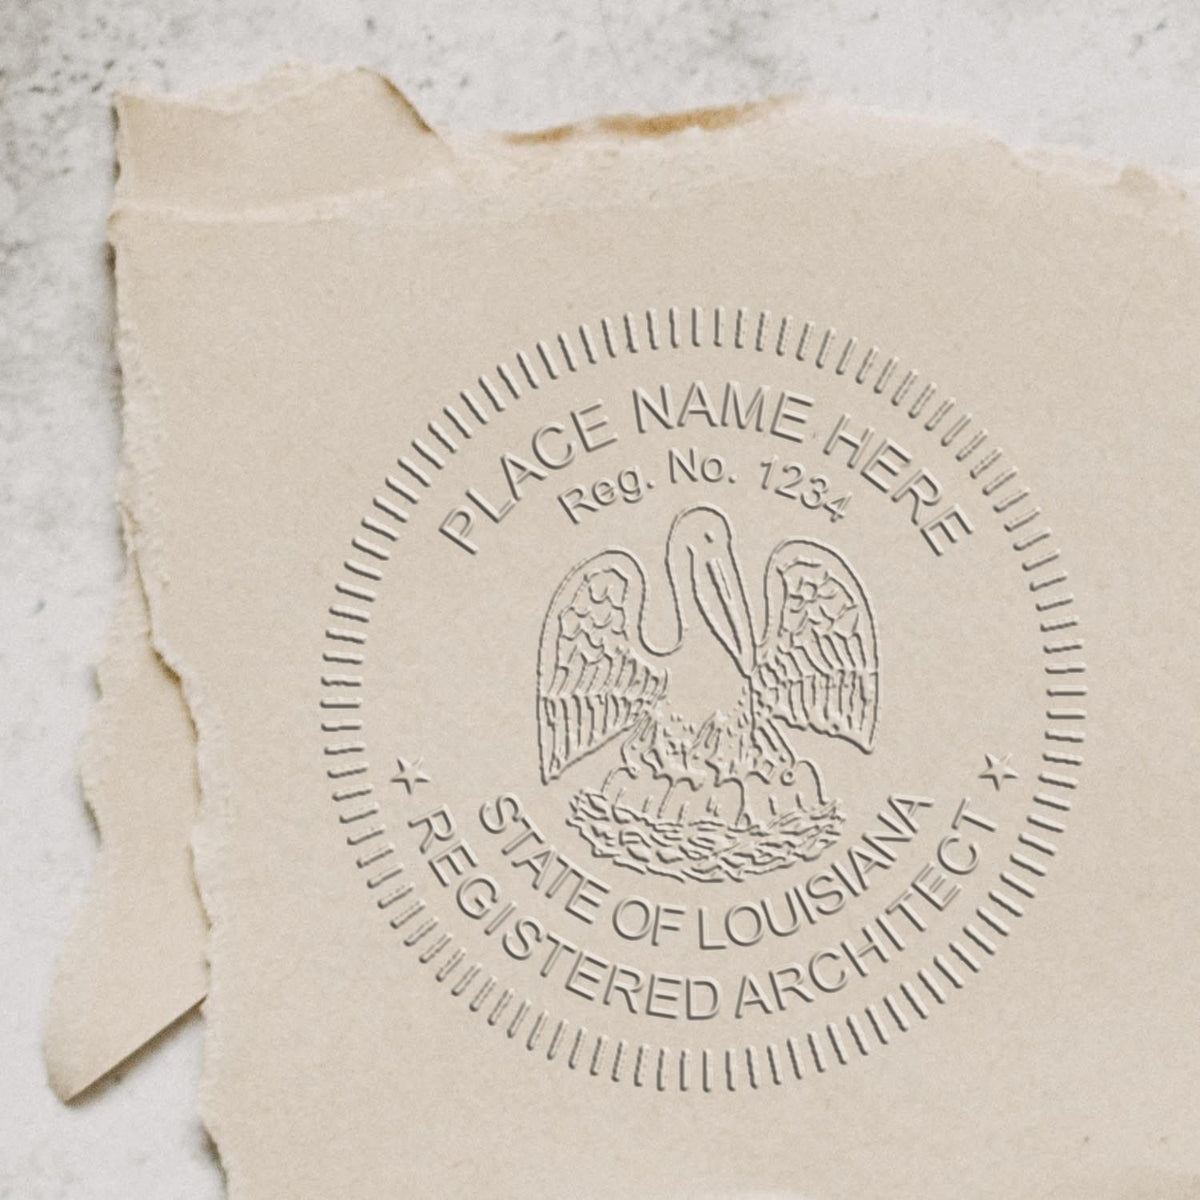 A photograph of the Hybrid Louisiana Architect Seal stamp impression reveals a vivid, professional image of the on paper.